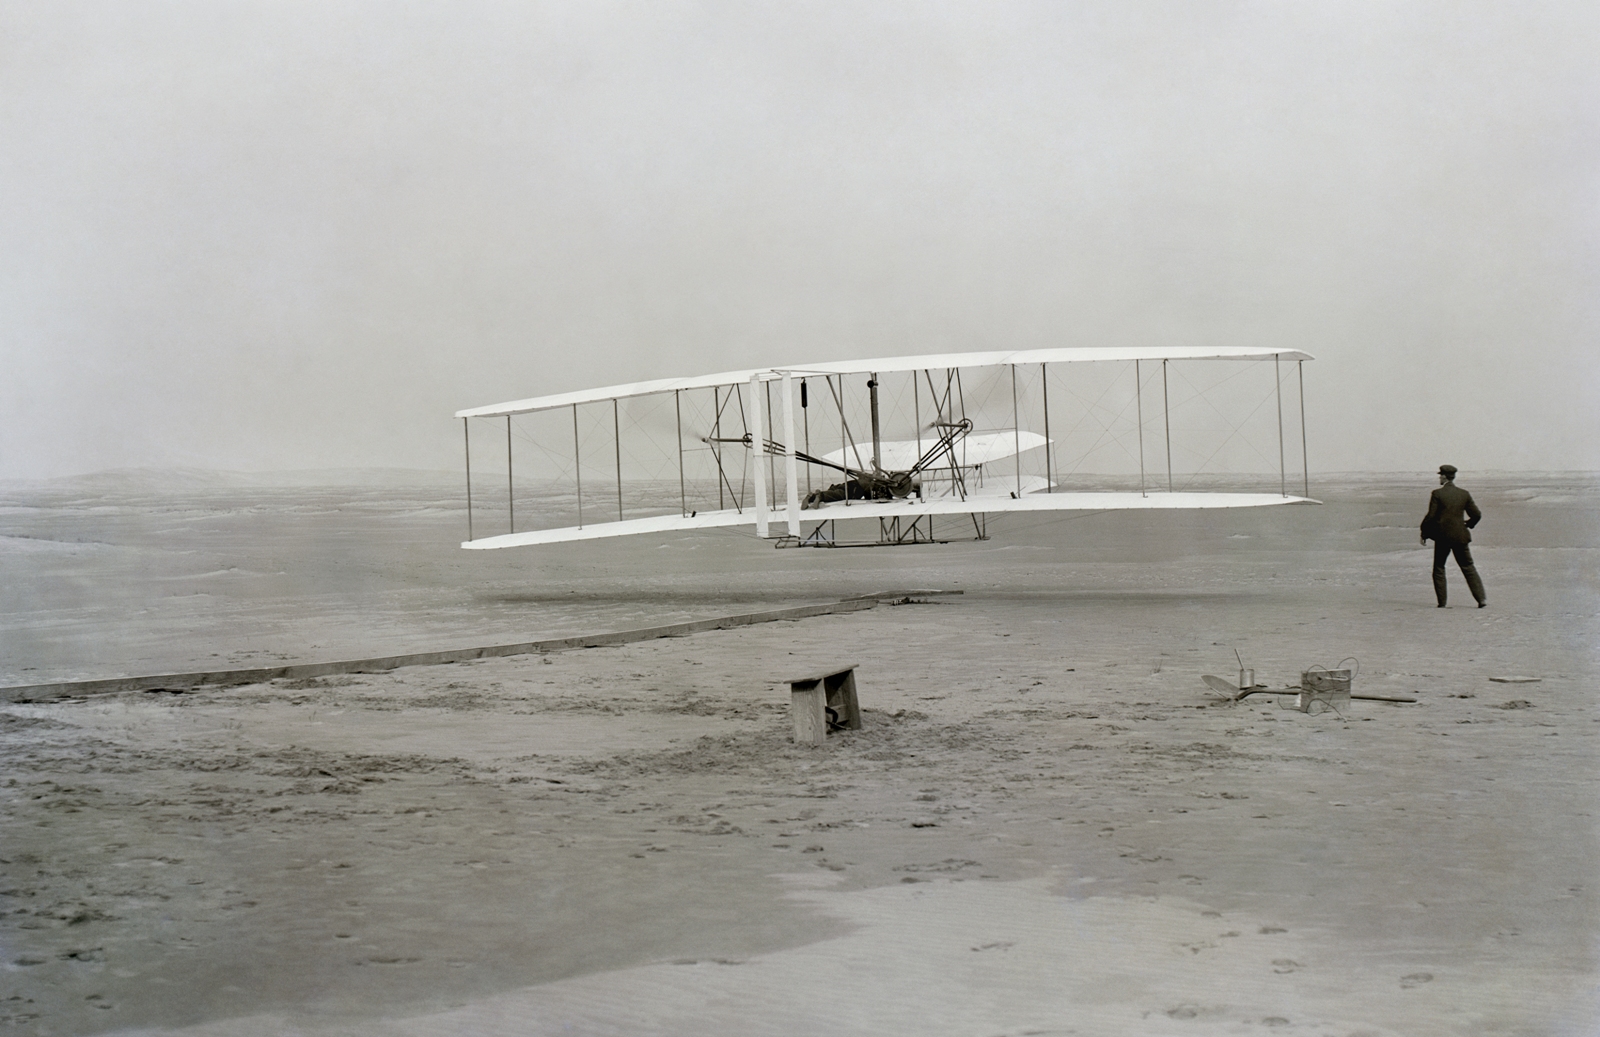 The Wright brothers' first flight